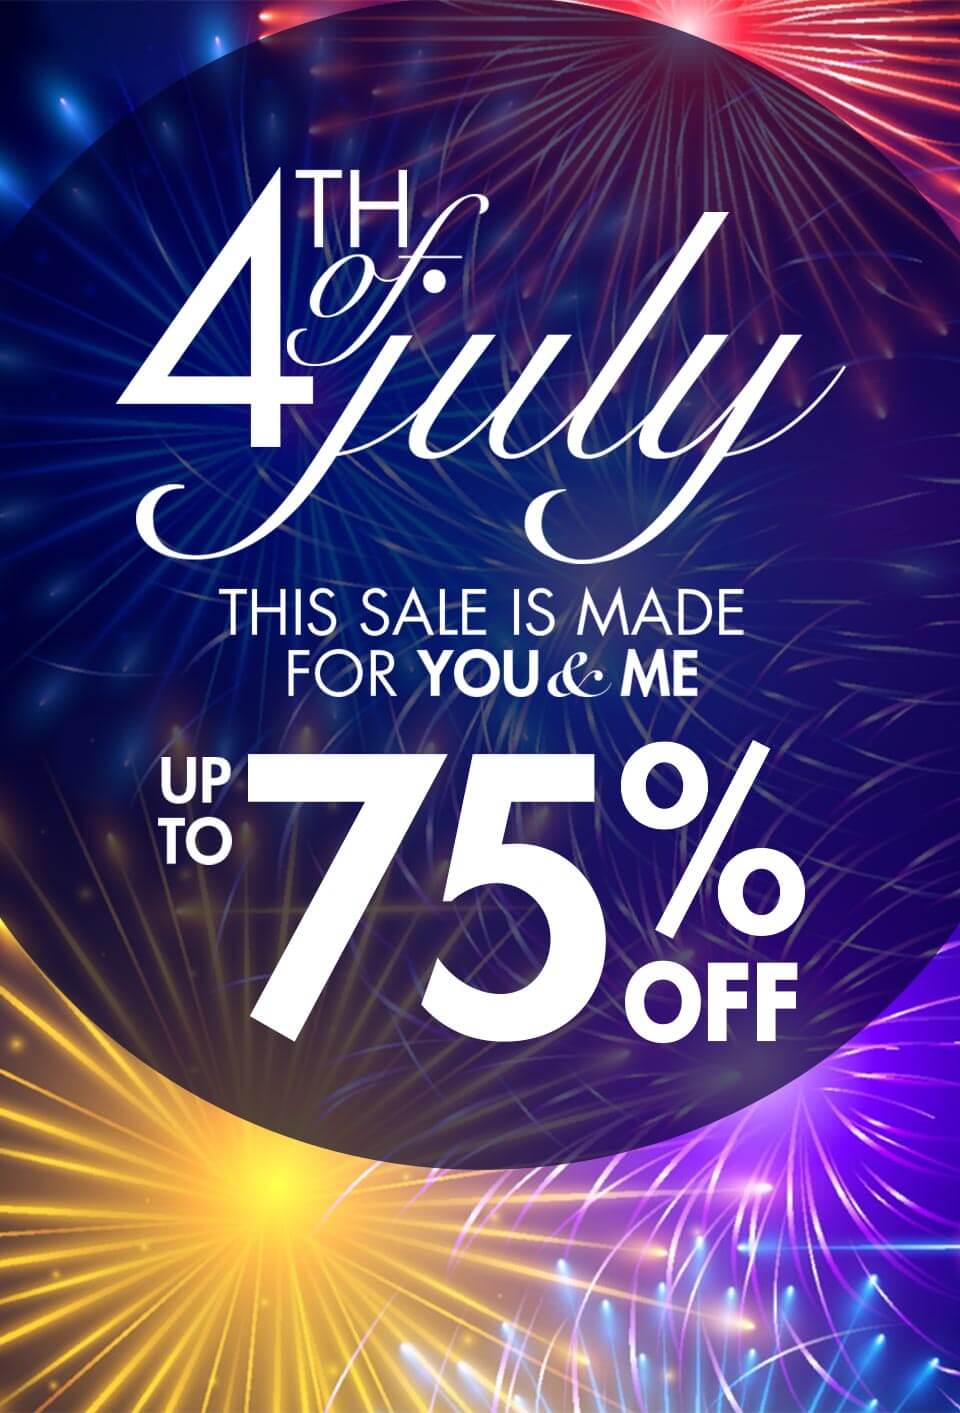 4th of July: The sale is made for you and me. Up to 75% off.